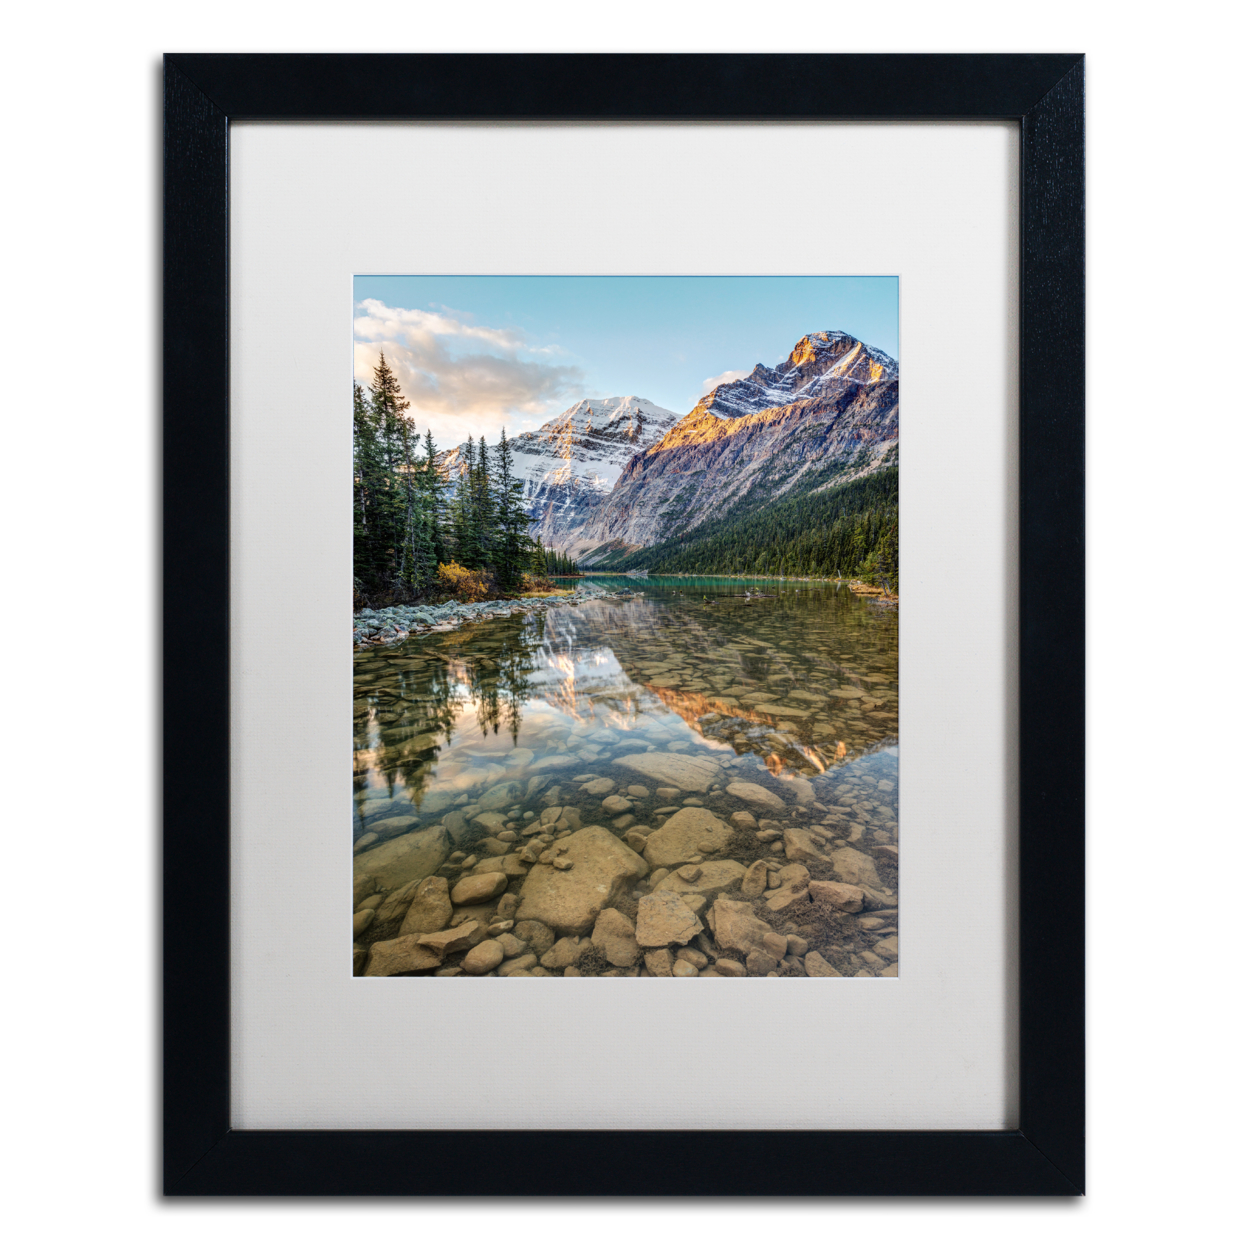 Trademark Global Pierre Leclerc Mount Edith Cavell Sunrise Black Wooden Framed Art 18 x 22 Inches